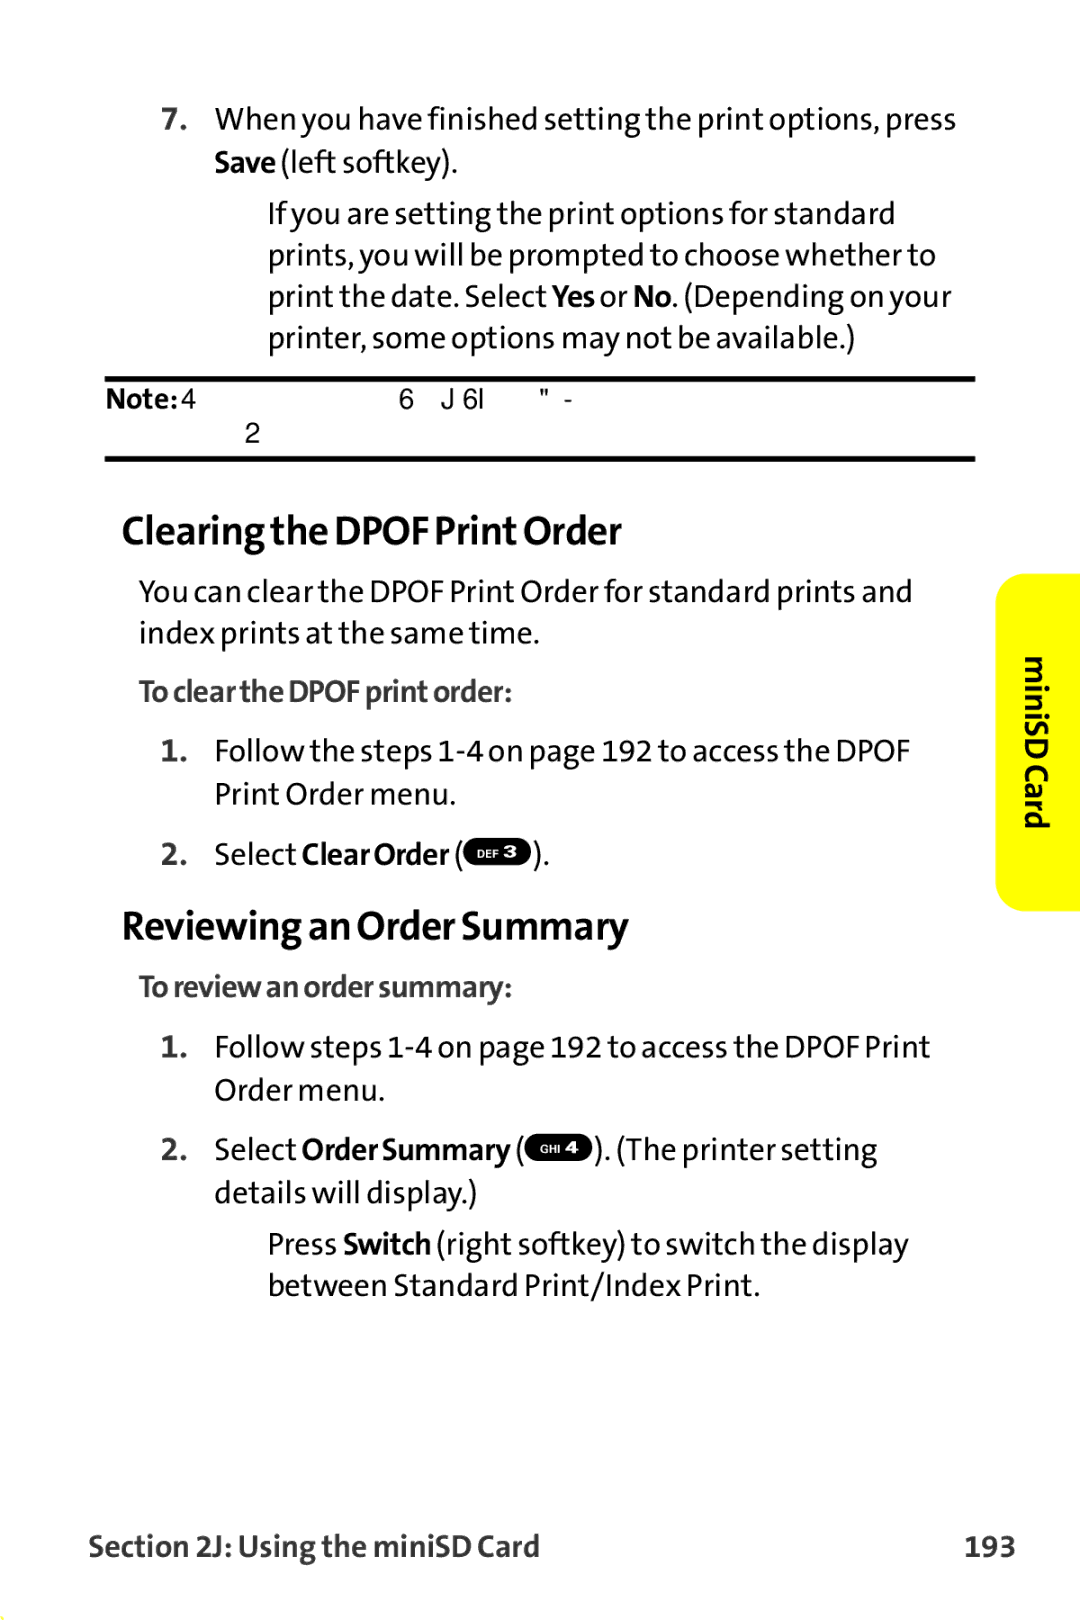 Sanyo MM-9000 Clearing the Dpof PrintOrder, Reviewing an Order Summary, TocleartheDPOFprintorder, Toreviewanordersummary 